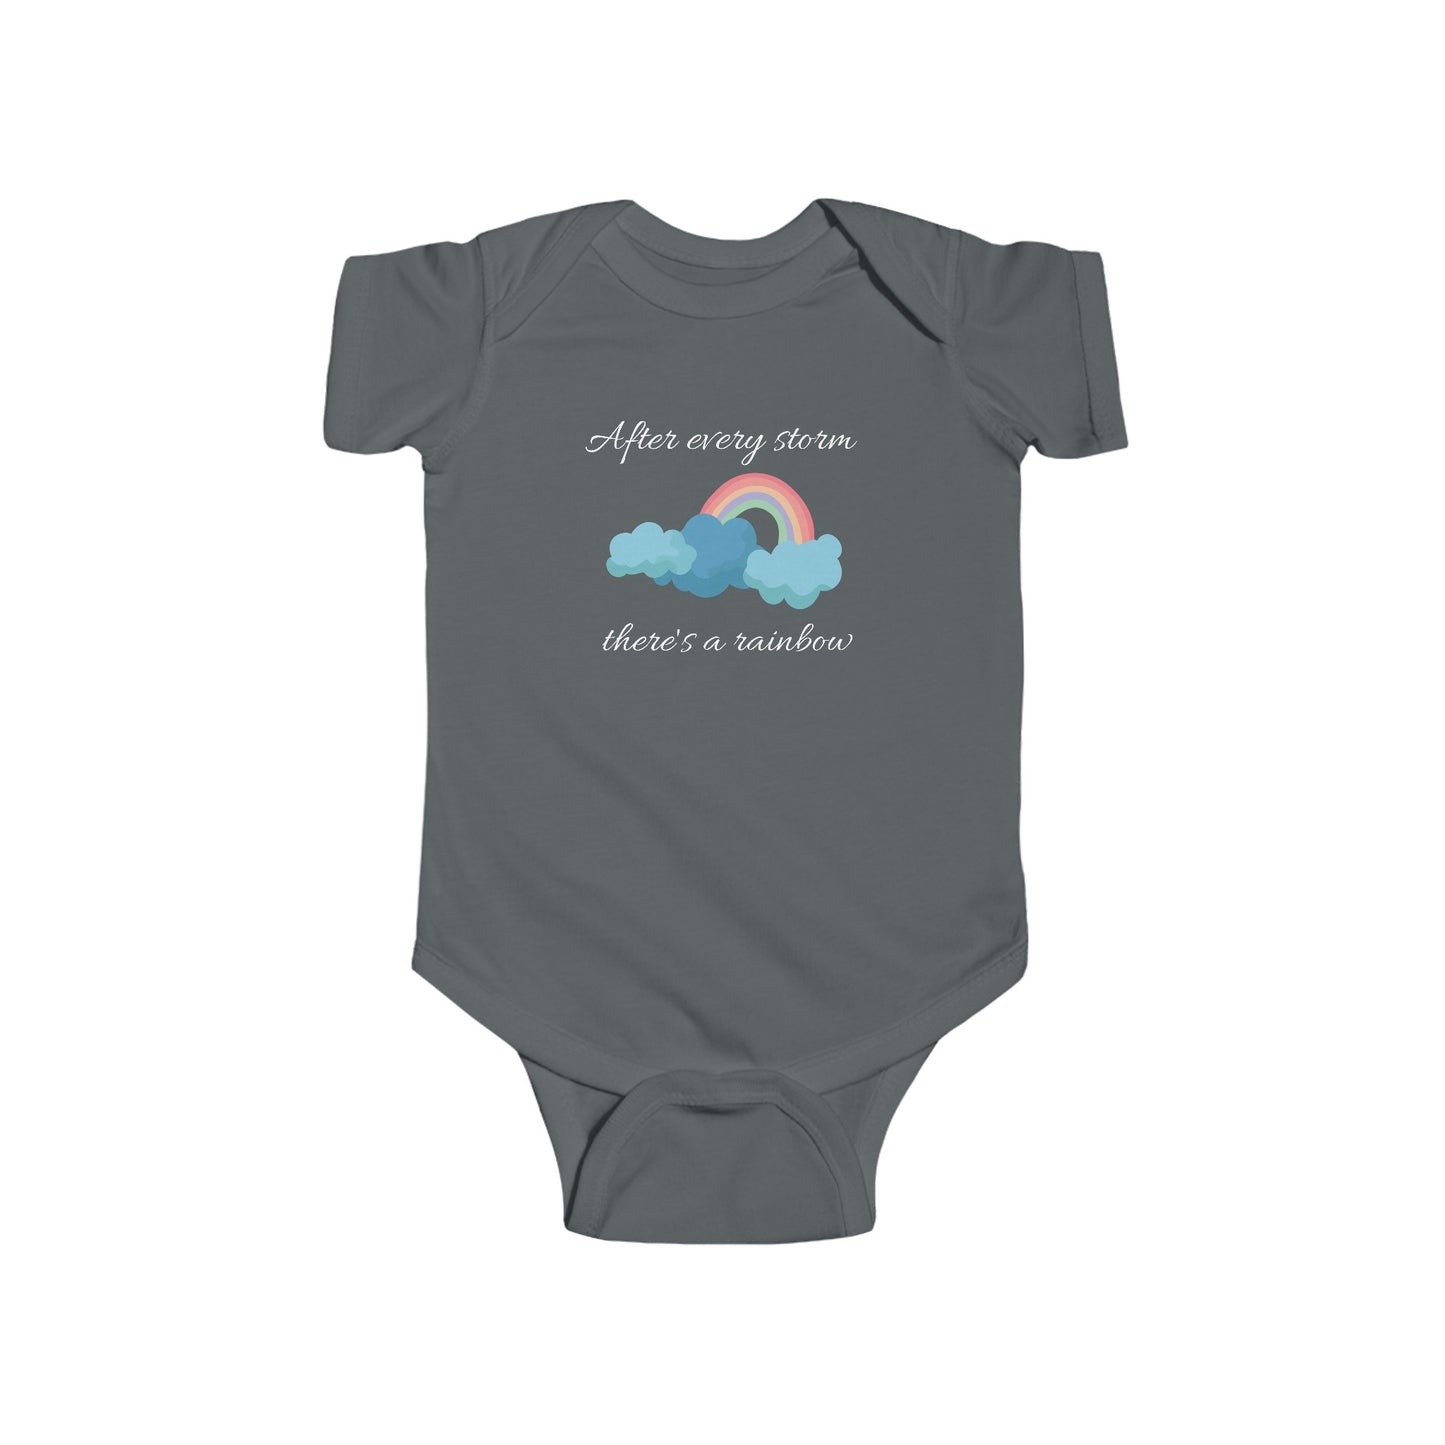 After every storm, there's a rainbow Baby Bodysuit